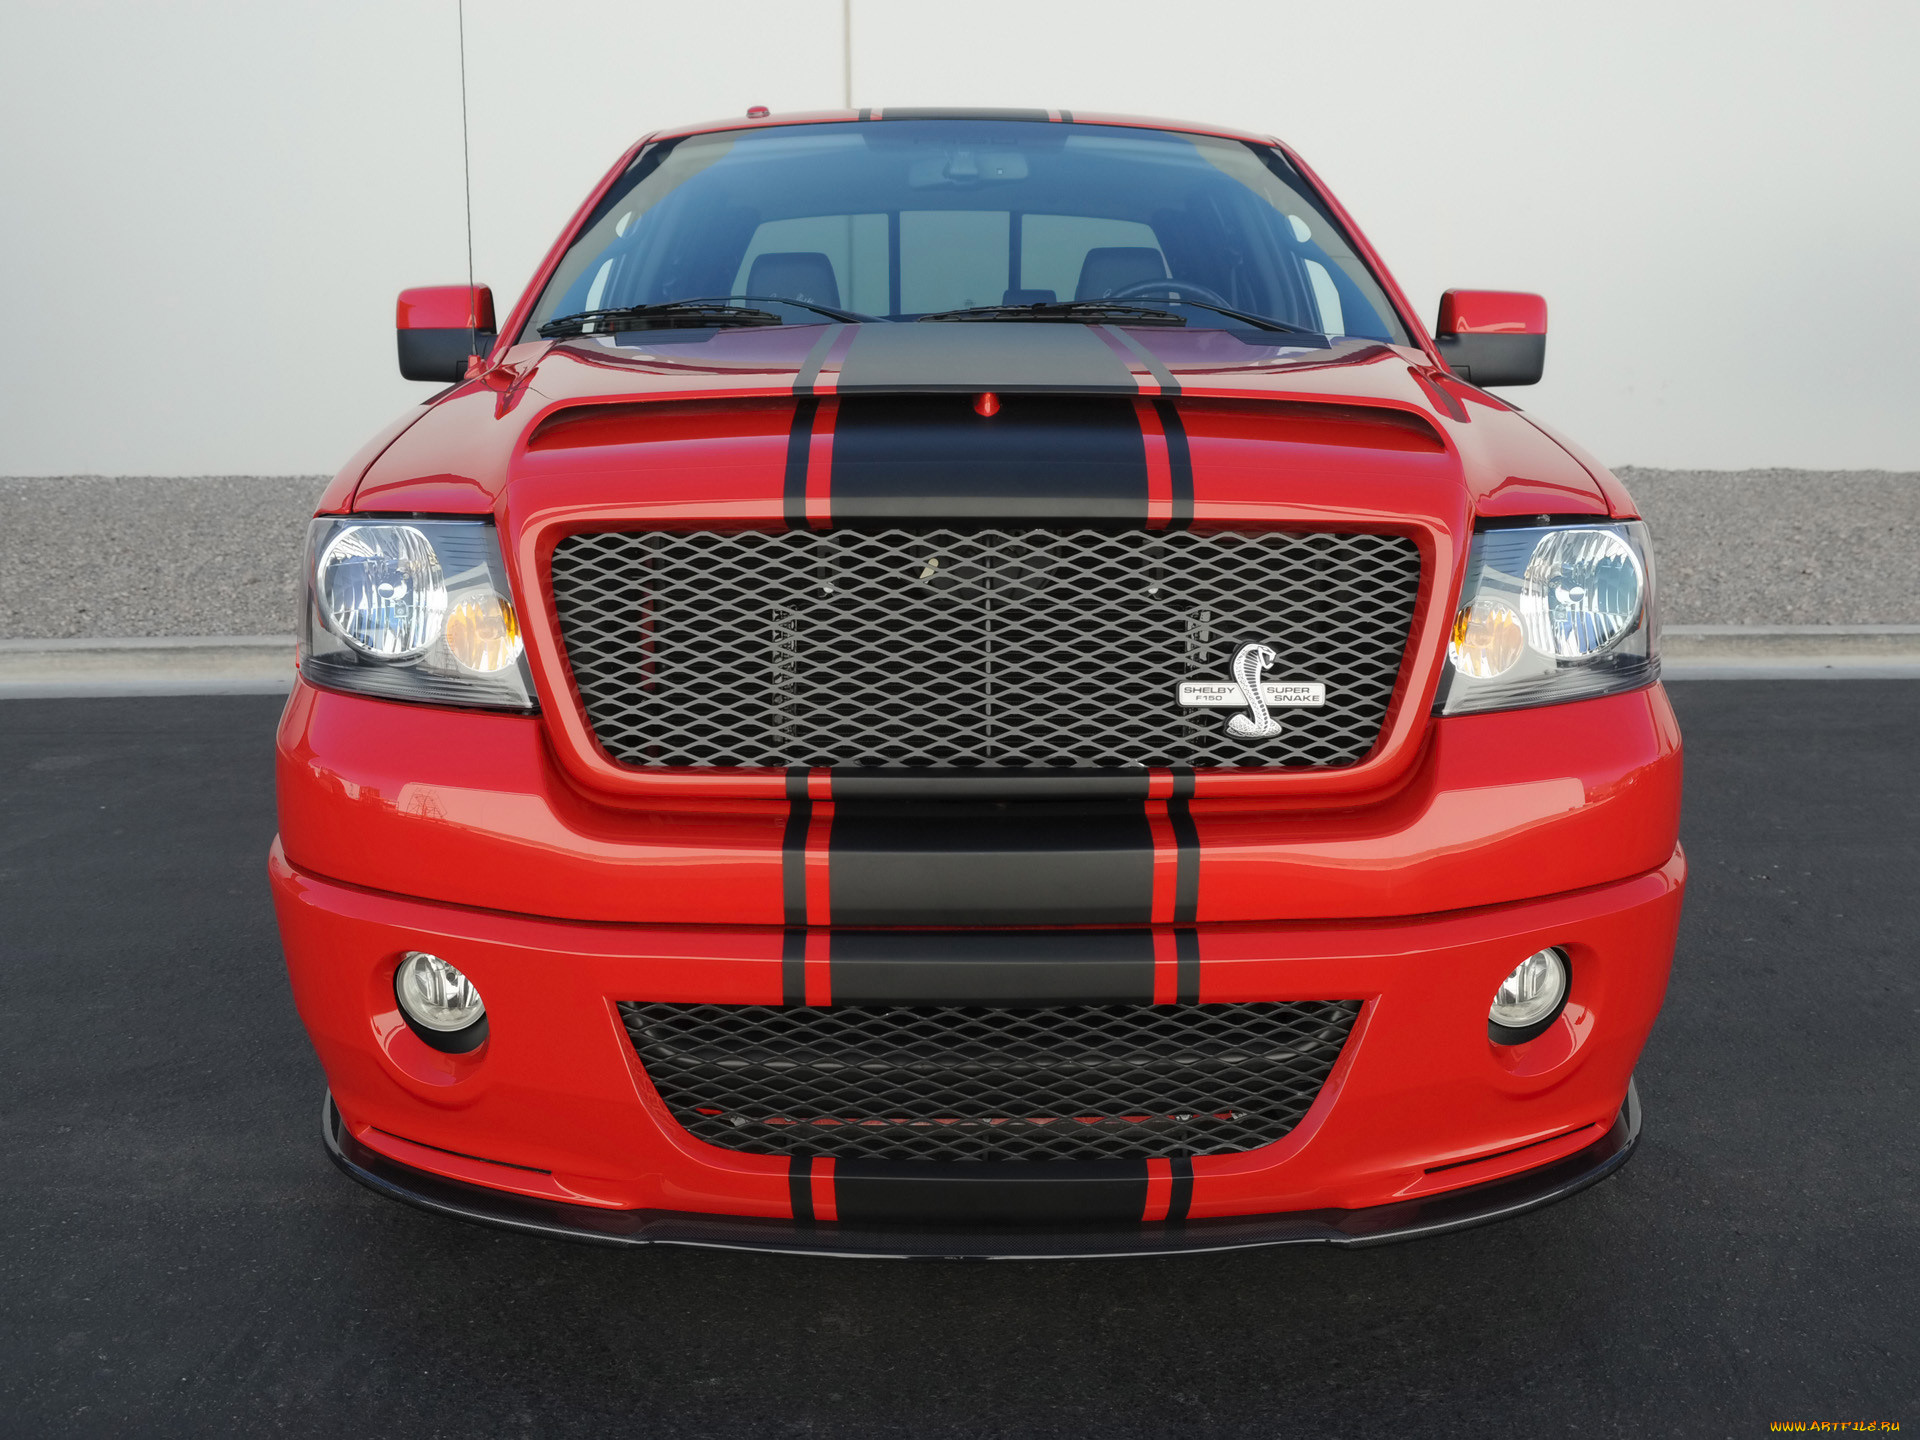 shelby f-150 super snake concept 2009, , ford, shelby, f-150, super, snake, concept, 2009